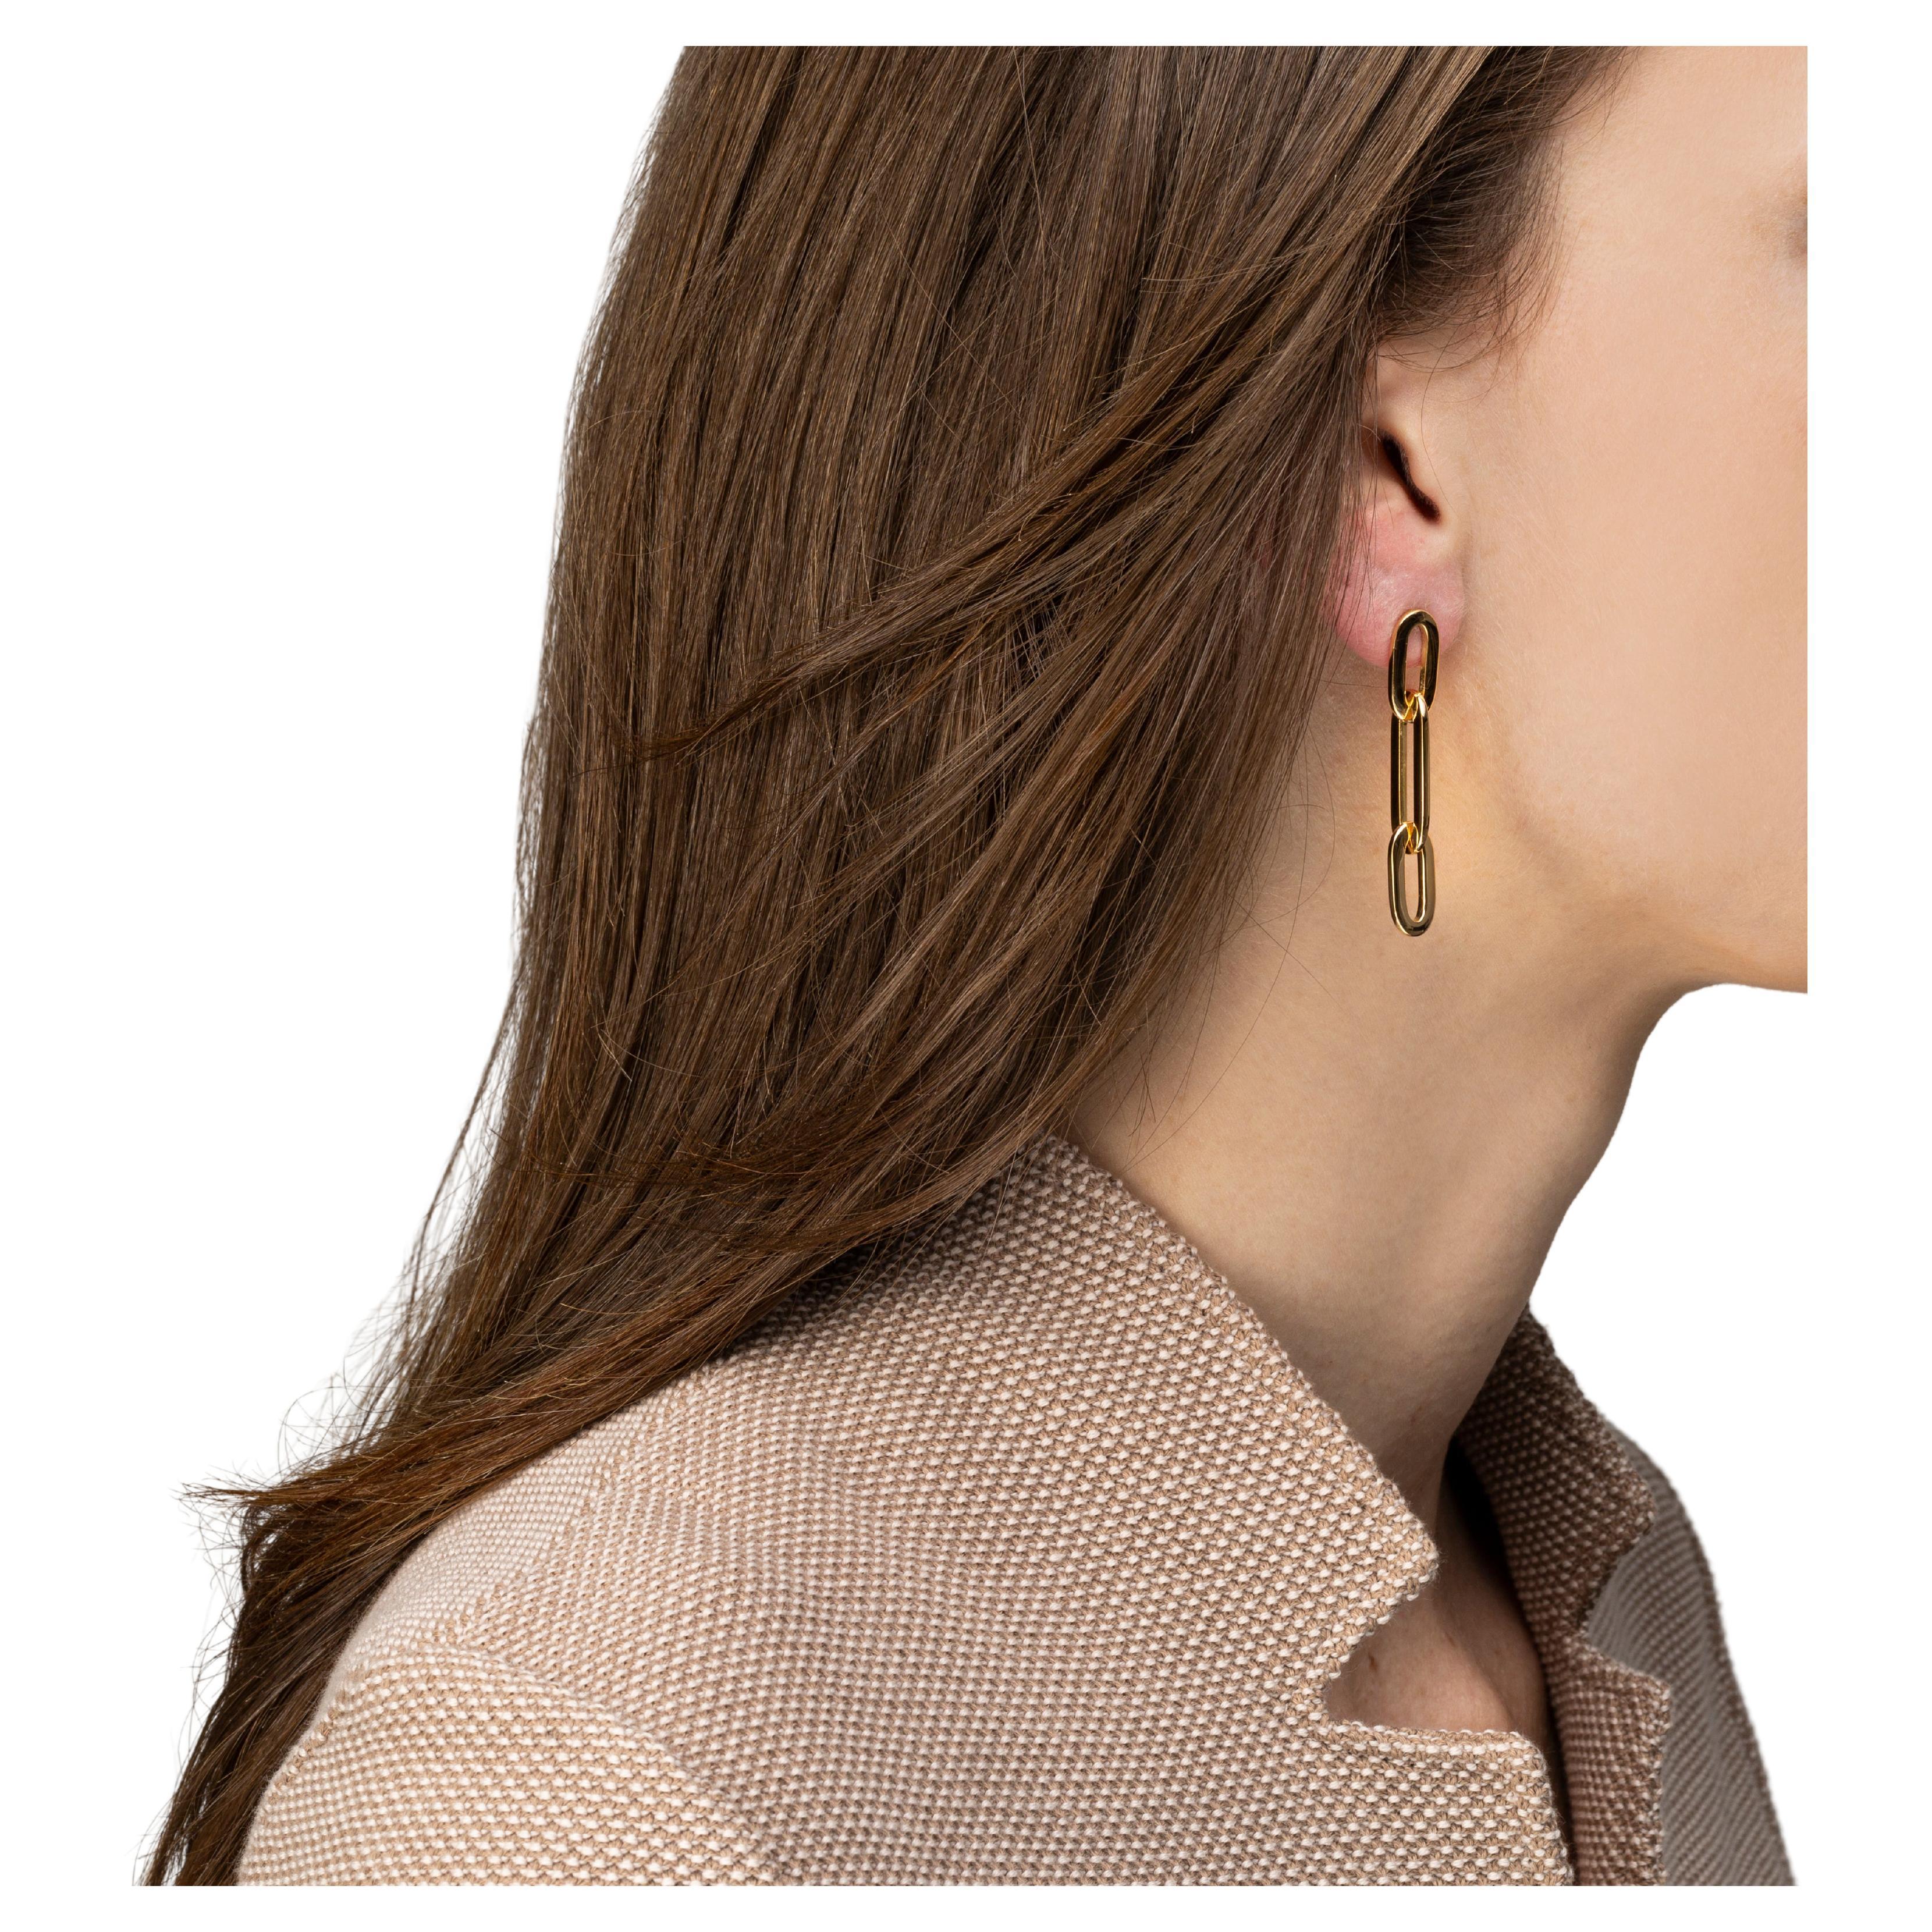 Alex Jona design collection, hand crafted in Italy, 18 karat yellow gold chain dangle earrings.
Dimensions:Lmm48.9/in1.9-Wmm8.5/in0.33.
Alex Jona jewels stand out, not only for their special design and for the excellent quality of the gemstones, but